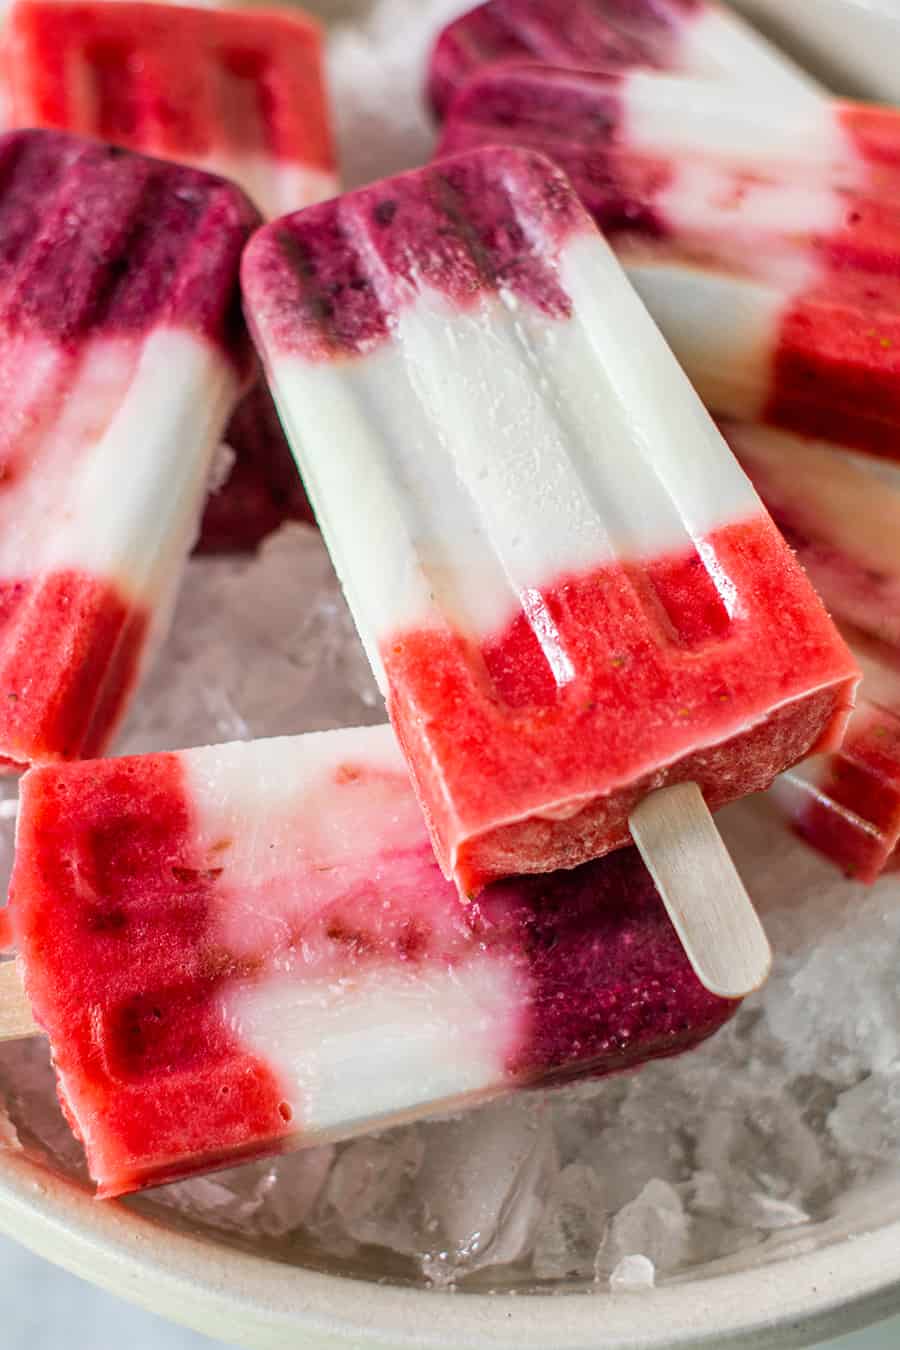 Red, white and blue popsicles in a bowl of ice.